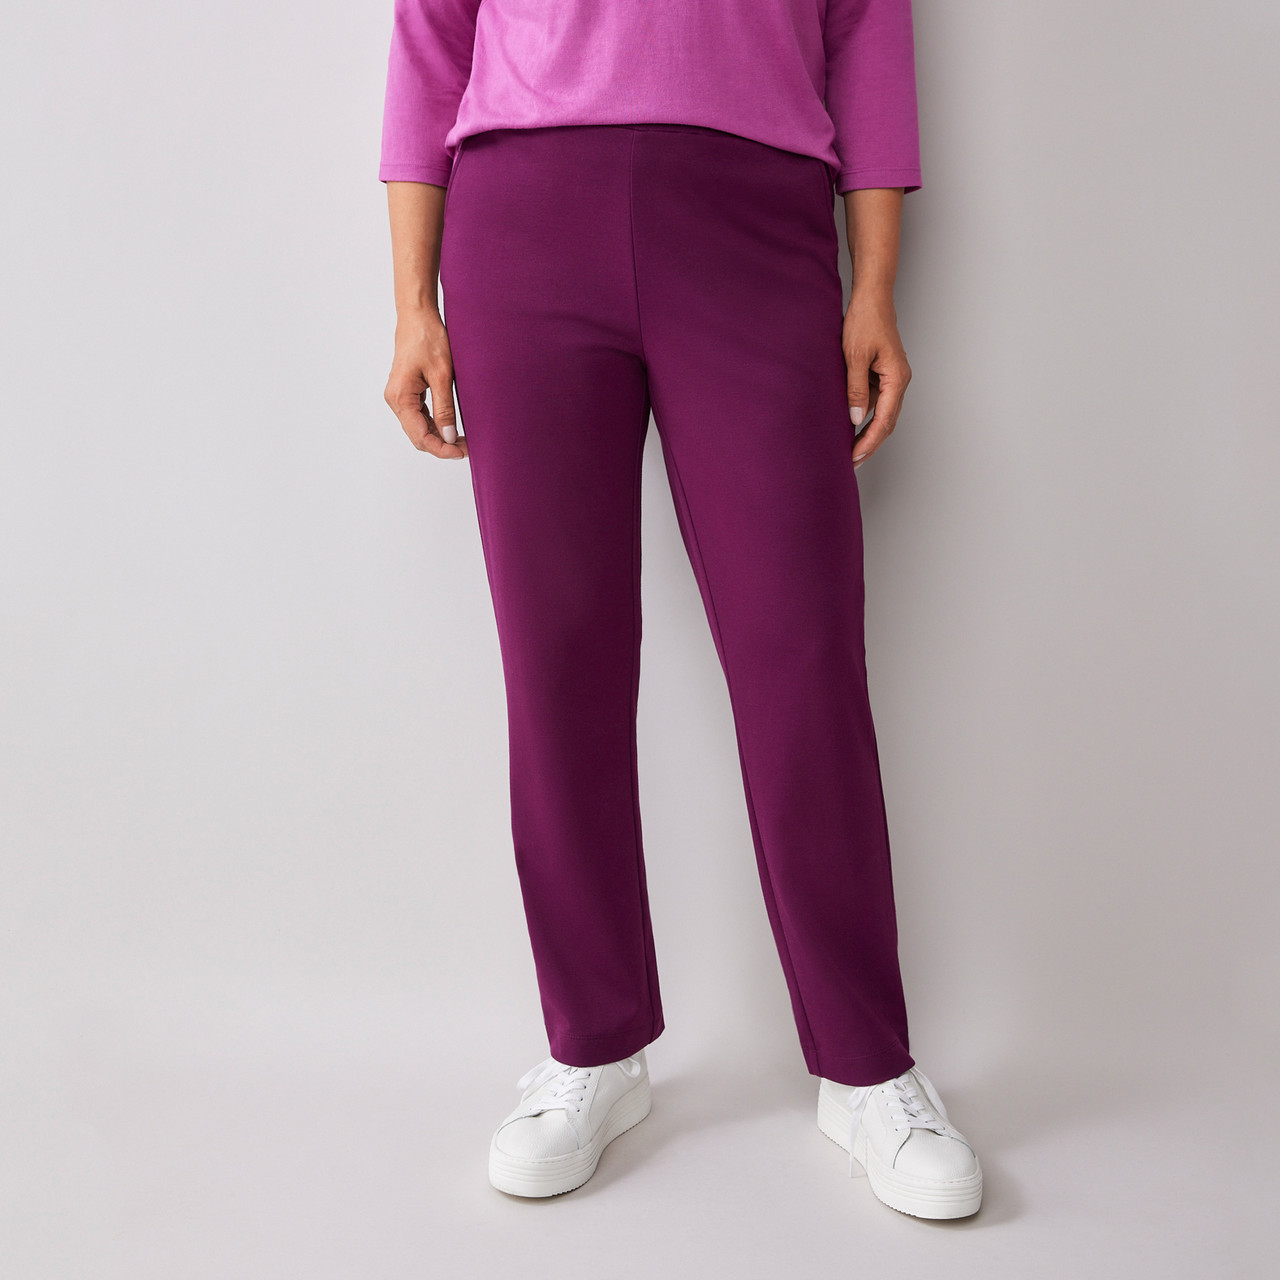 Women's Pull On Knit Pant